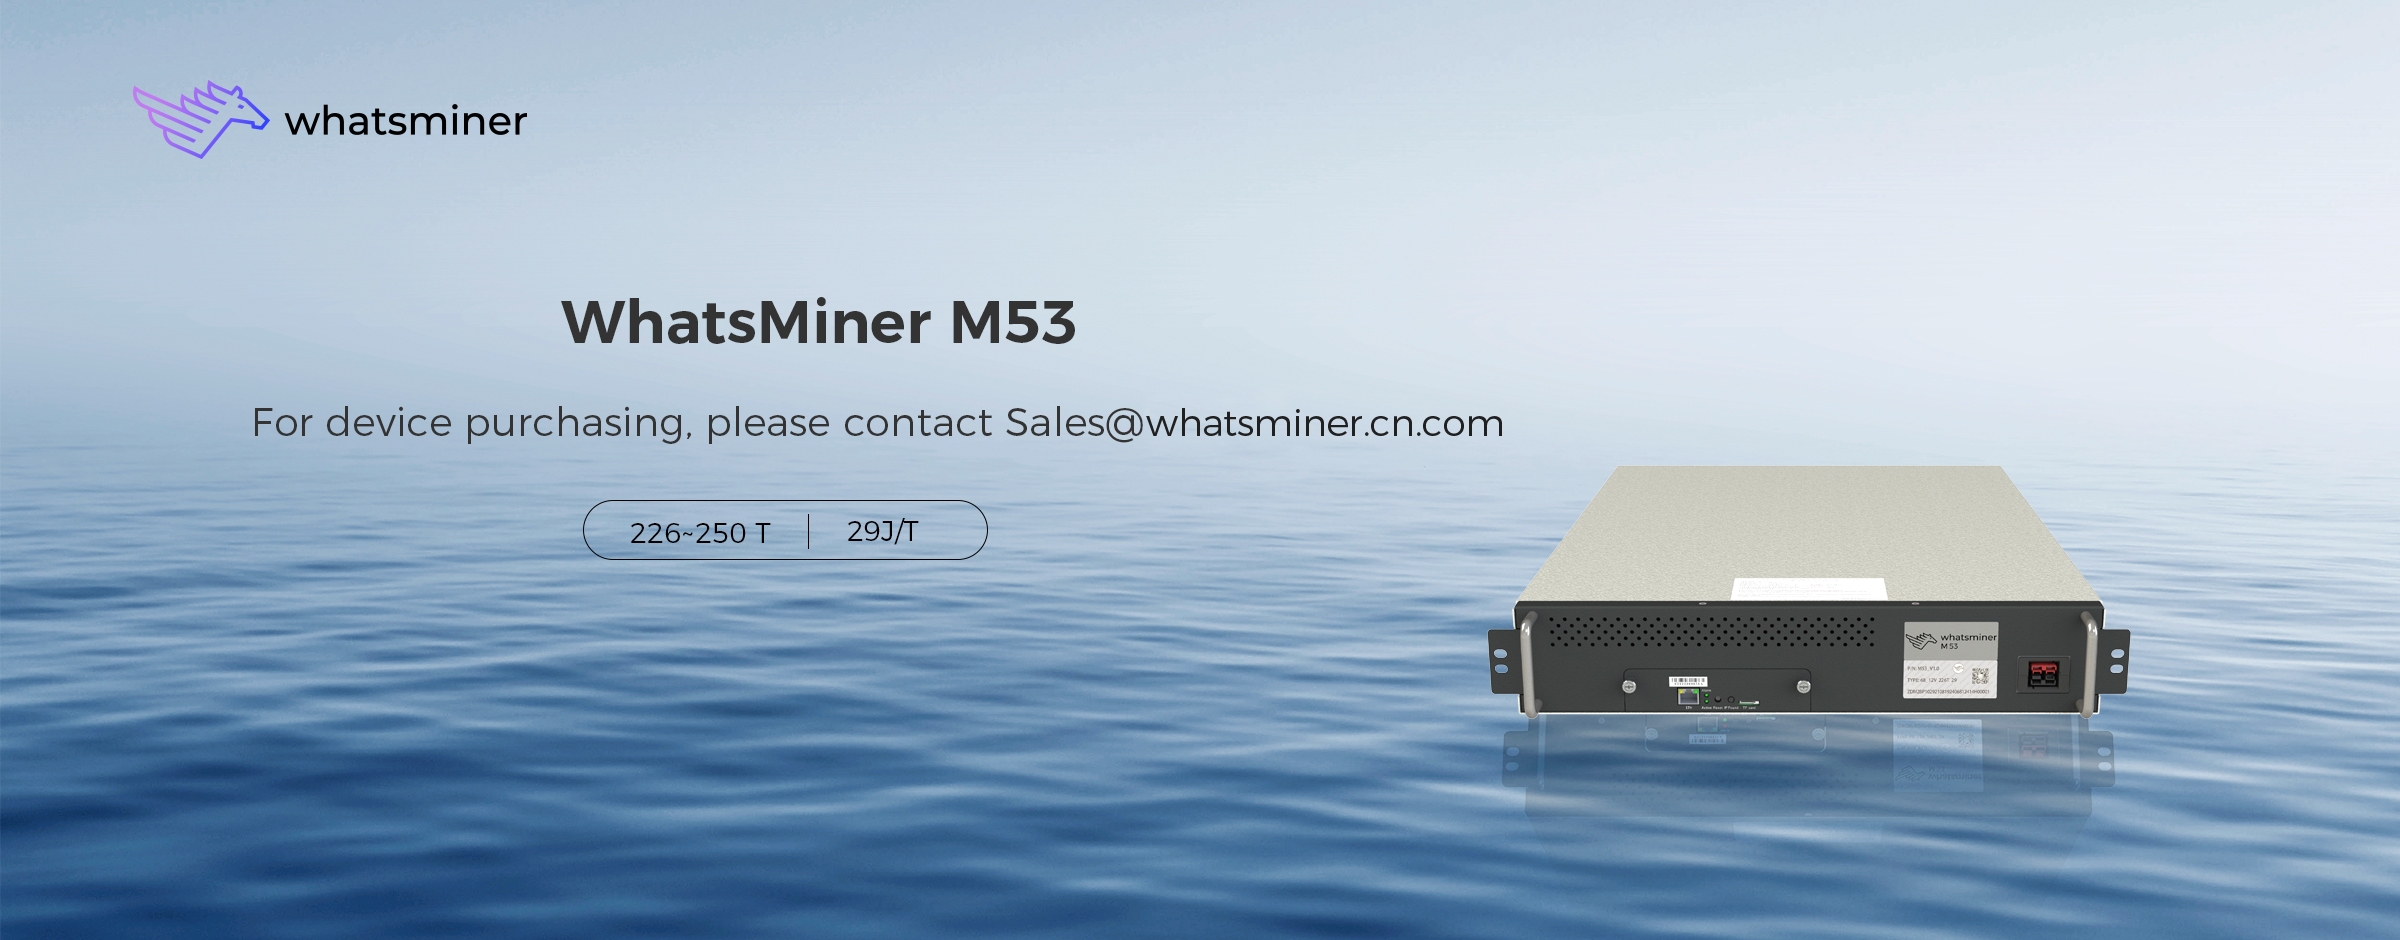 whatsminer hydro-cooling M53